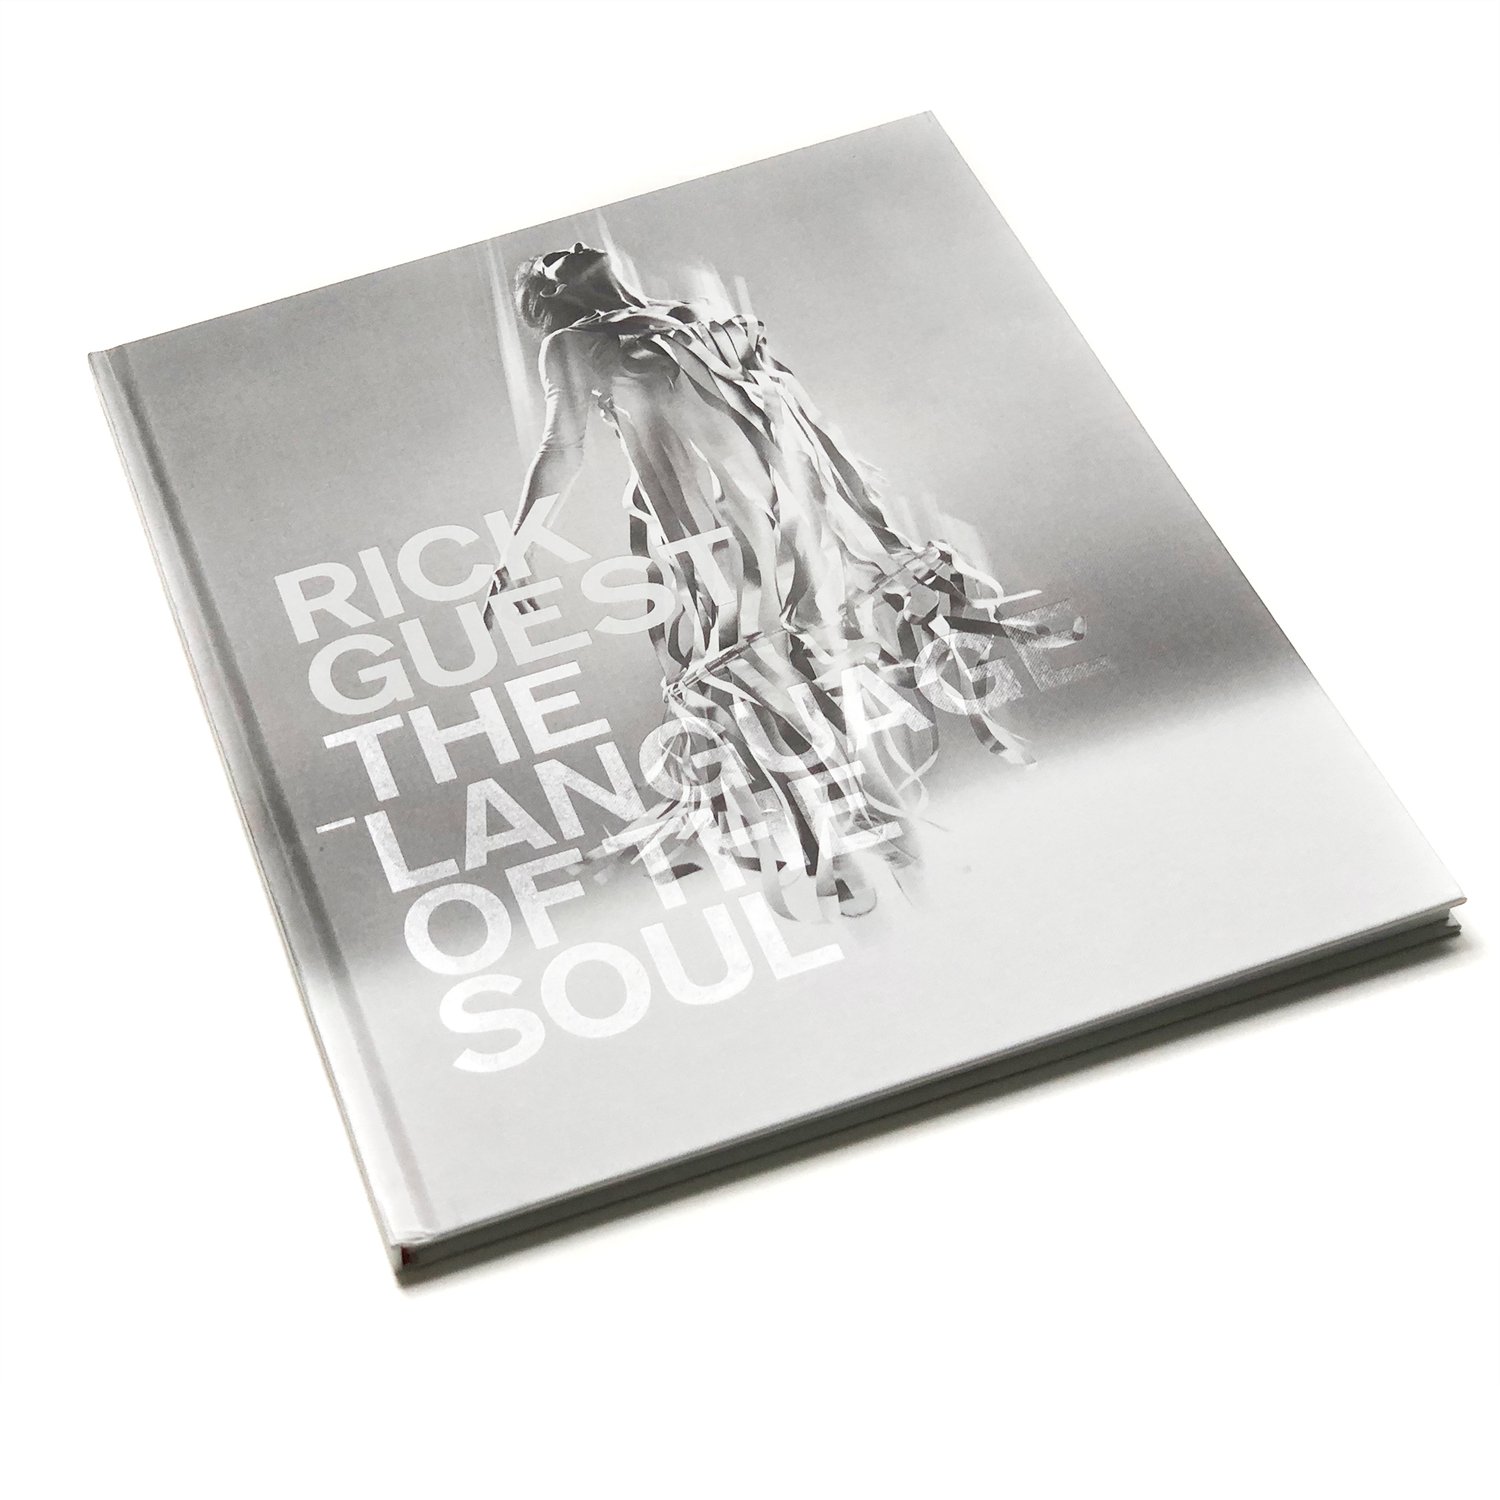 Image of Signed print from "The Language of the Soul" series, with accompanying book. 